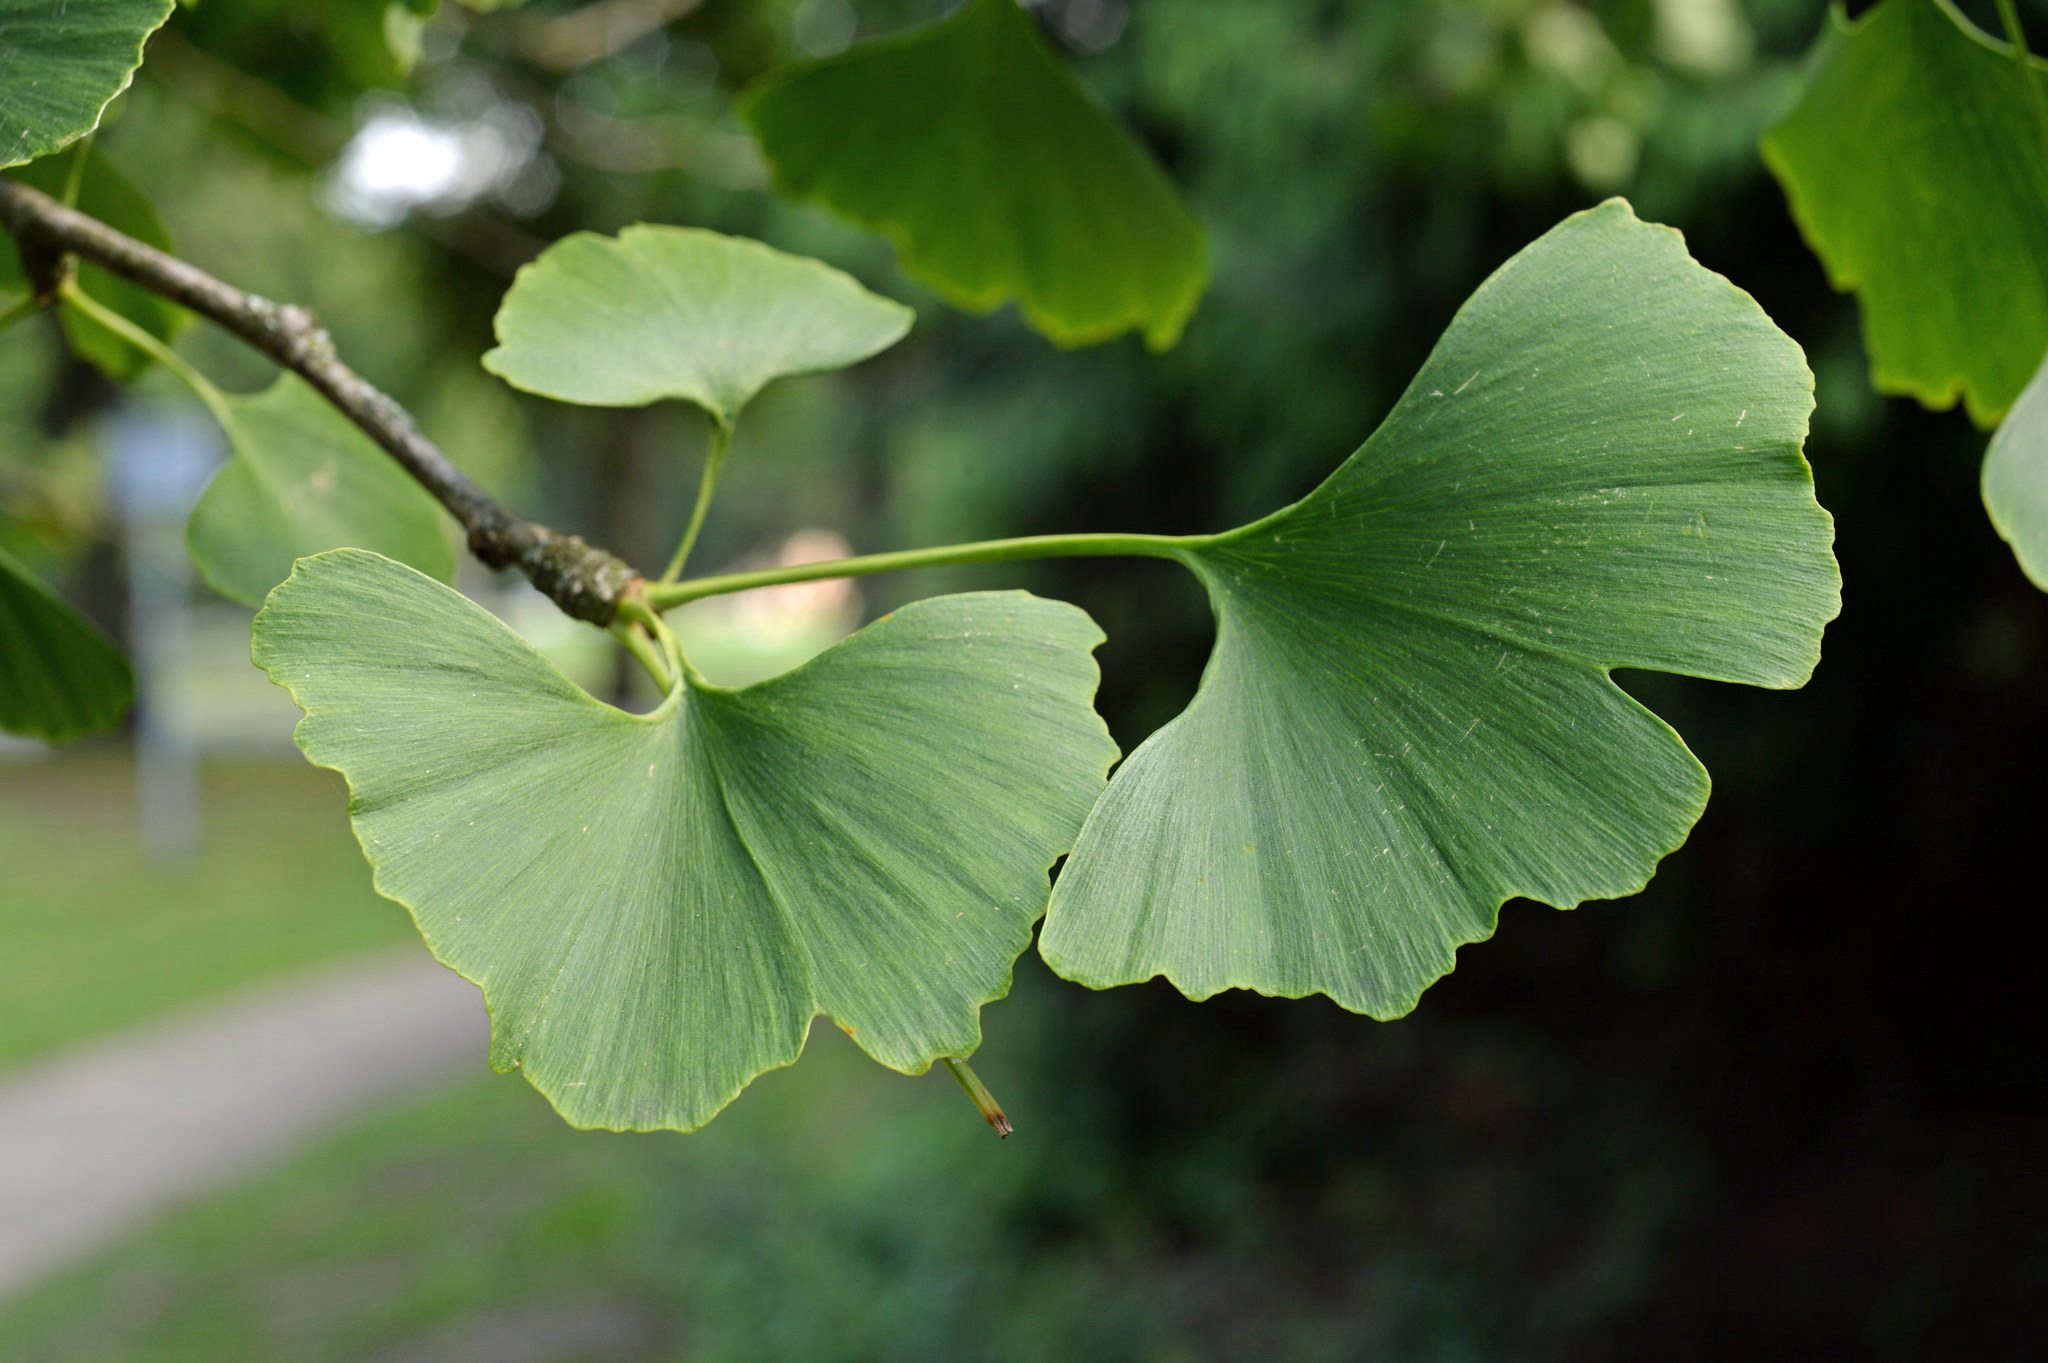 Ginkgo - Grand and Golden - Tree Topics